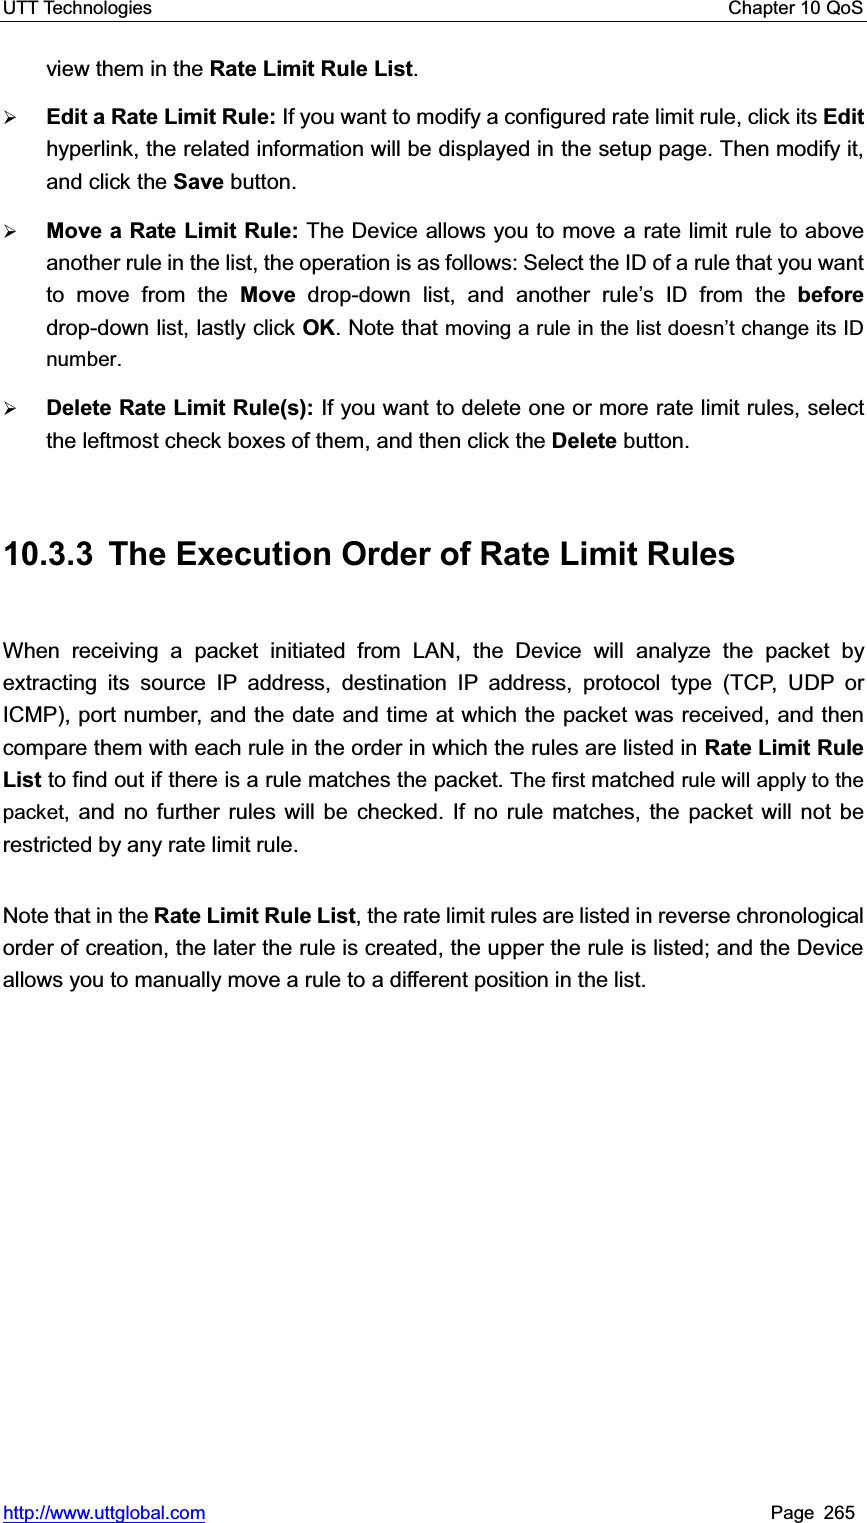 UTT Technologies    Chapter 10 QoS   http://www.uttglobal.com Page 265 view them in the Rate Limit Rule List.¾Edit a Rate Limit Rule: If you want to modify a configured rate limit rule, click its Edithyperlink, the related information will be displayed in the setup page. Then modify it, and click the Save button. ¾Move a Rate Limit Rule: The Device allows you to move a rate limit rule to above another rule in the list, the operation is as follows: Select the ID of a rule that you want to move from the Move drop-down list, and another rule¶s ID from the beforedrop-down list, lastly click OK. Note that moving a rule in the list doesn¶WFKDQJHLWV,&apos;number.¾Delete Rate Limit Rule(s): If you want to delete one or more rate limit rules, select the leftmost check boxes of them, and then click the Delete button. 10.3.3  The Execution Order of Rate Limit Rules When receiving a packet initiated from LAN, the Device will analyze the packet by extracting its source IP address, destination IP address, protocol type (TCP, UDP or ICMP), port number, and the date and time at which the packet was received, and then compare them with each rule in the order in which the rules are listed in Rate Limit Rule List to find out if there is a rule matches the packet. The first matched rule will apply to the packet, and no further rules will be checked. If no rule matches, the packet will not be restricted by any rate limit rule.   Note that in the Rate Limit Rule List, the rate limit rules are listed in reverse chronological order of creation, the later the rule is created, the upper the rule is listed; and the Device allows you to manually move a rule to a different position in the list. 